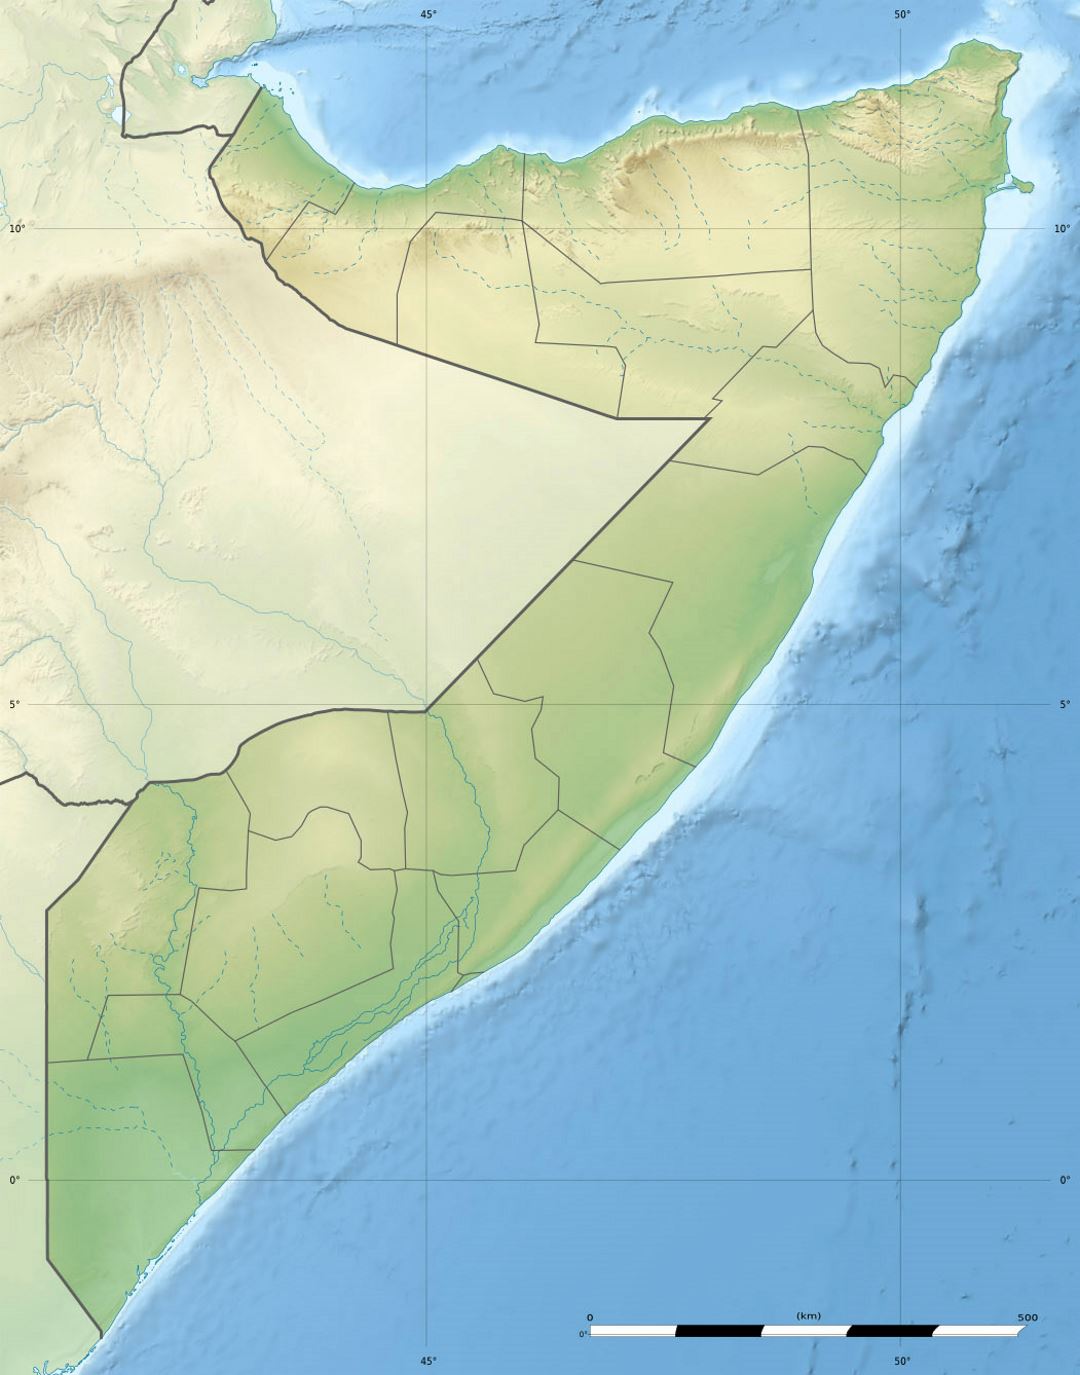 Detailed relief map of Somalia